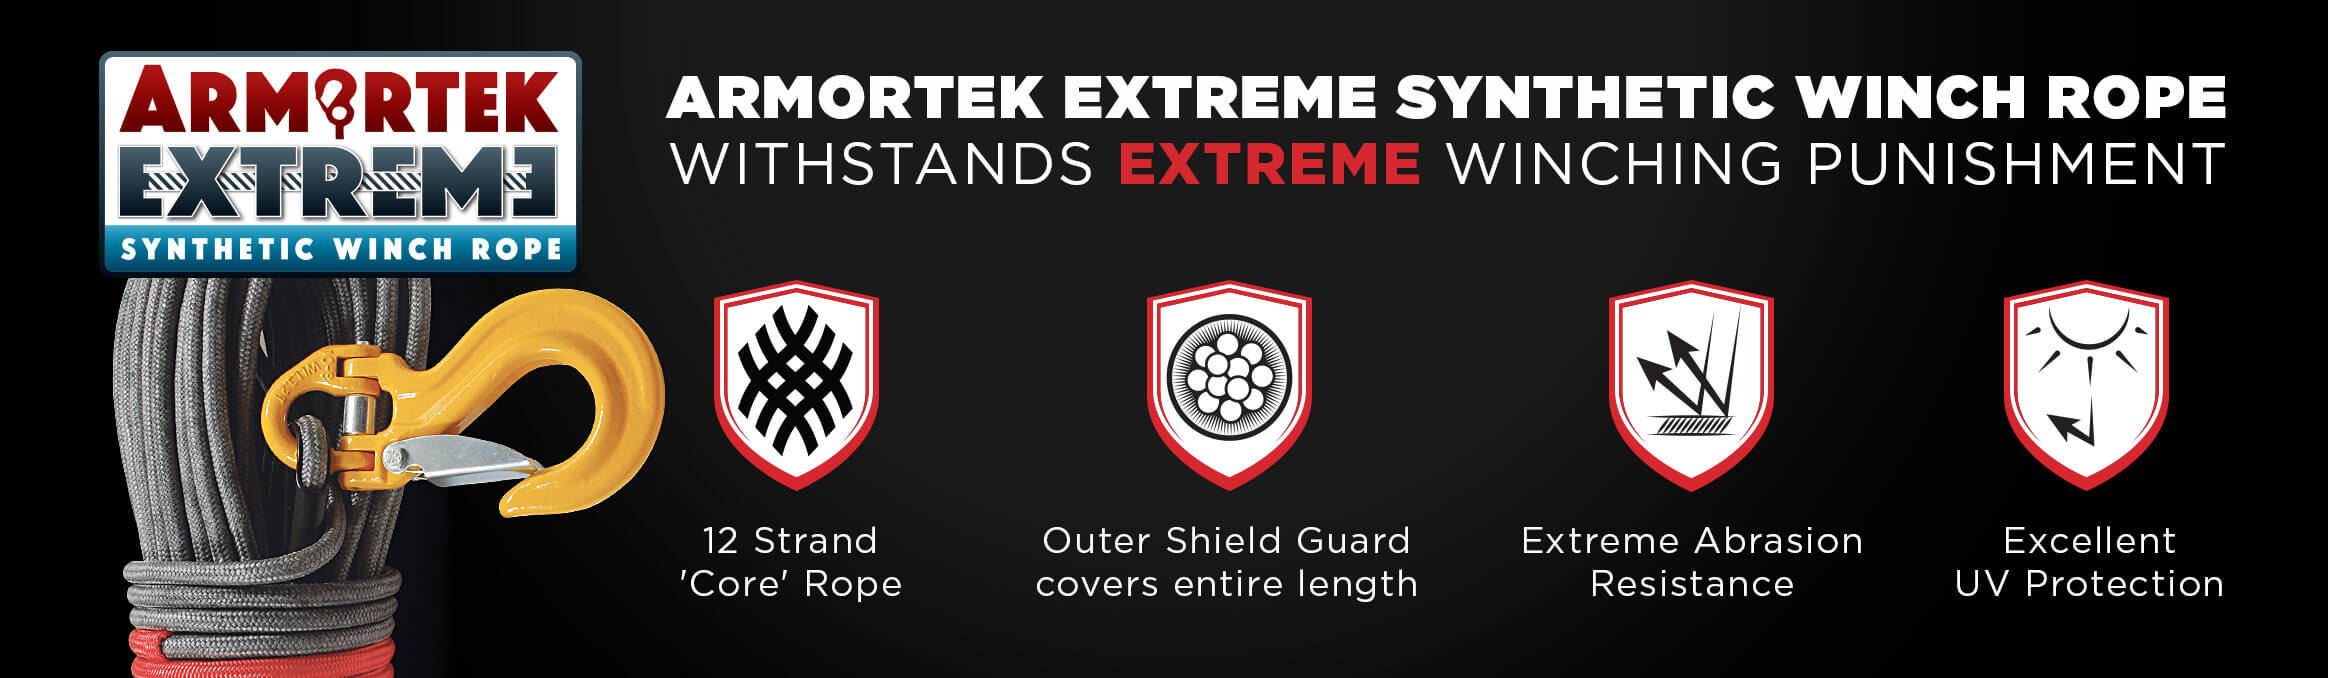 Armortek Extreme Synthetic Winch Rope